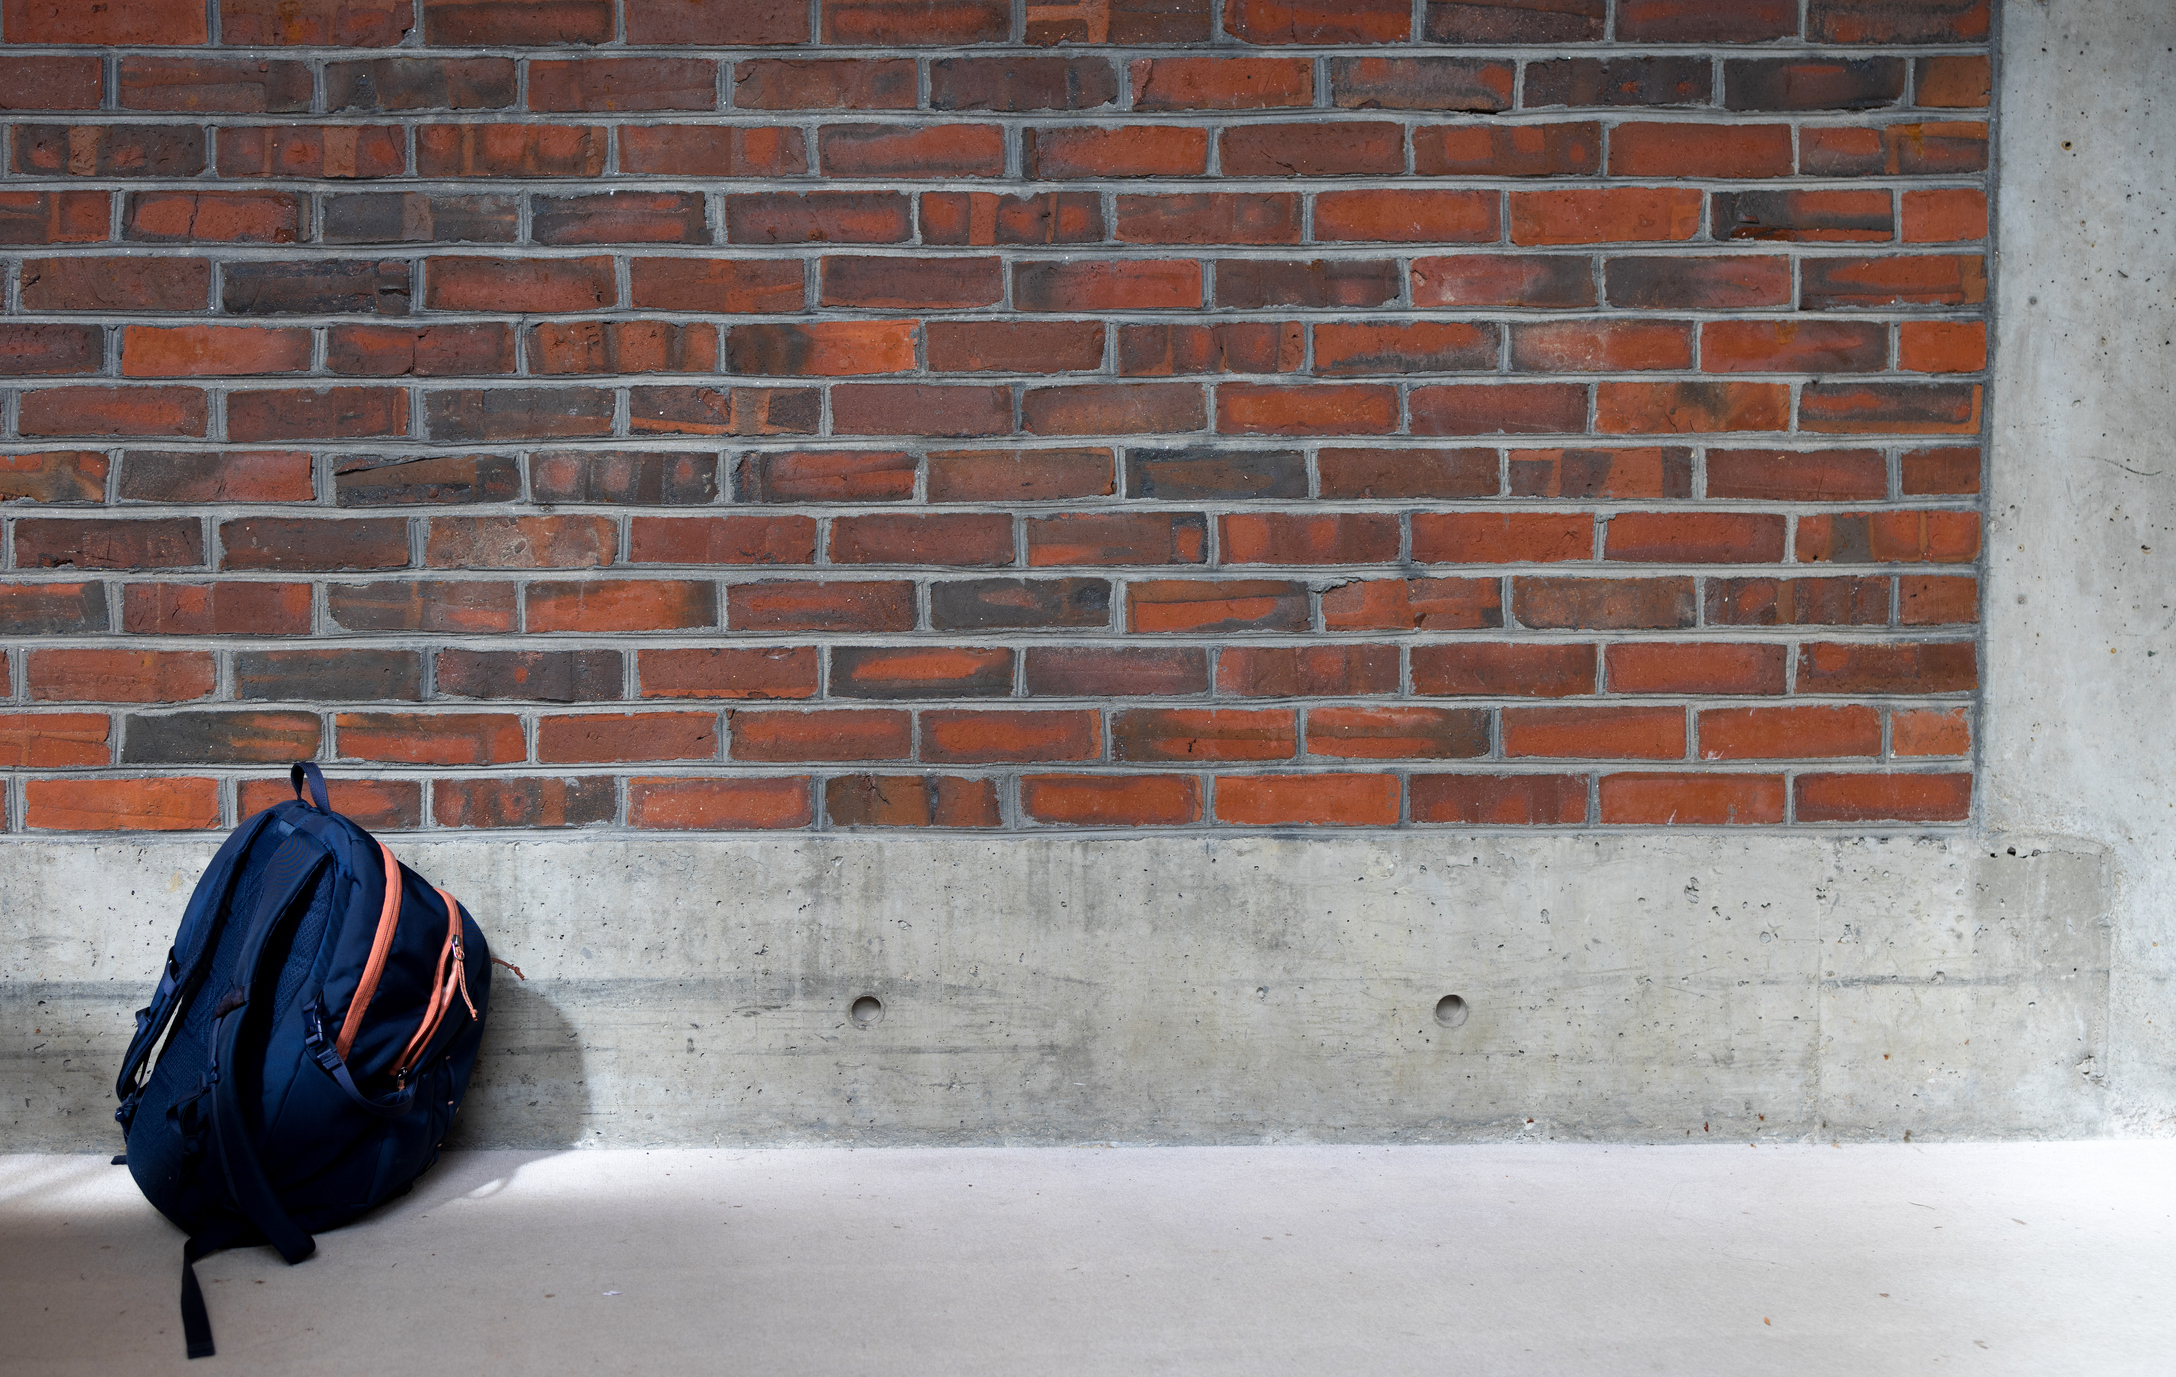 single student backpack in front of brick wall